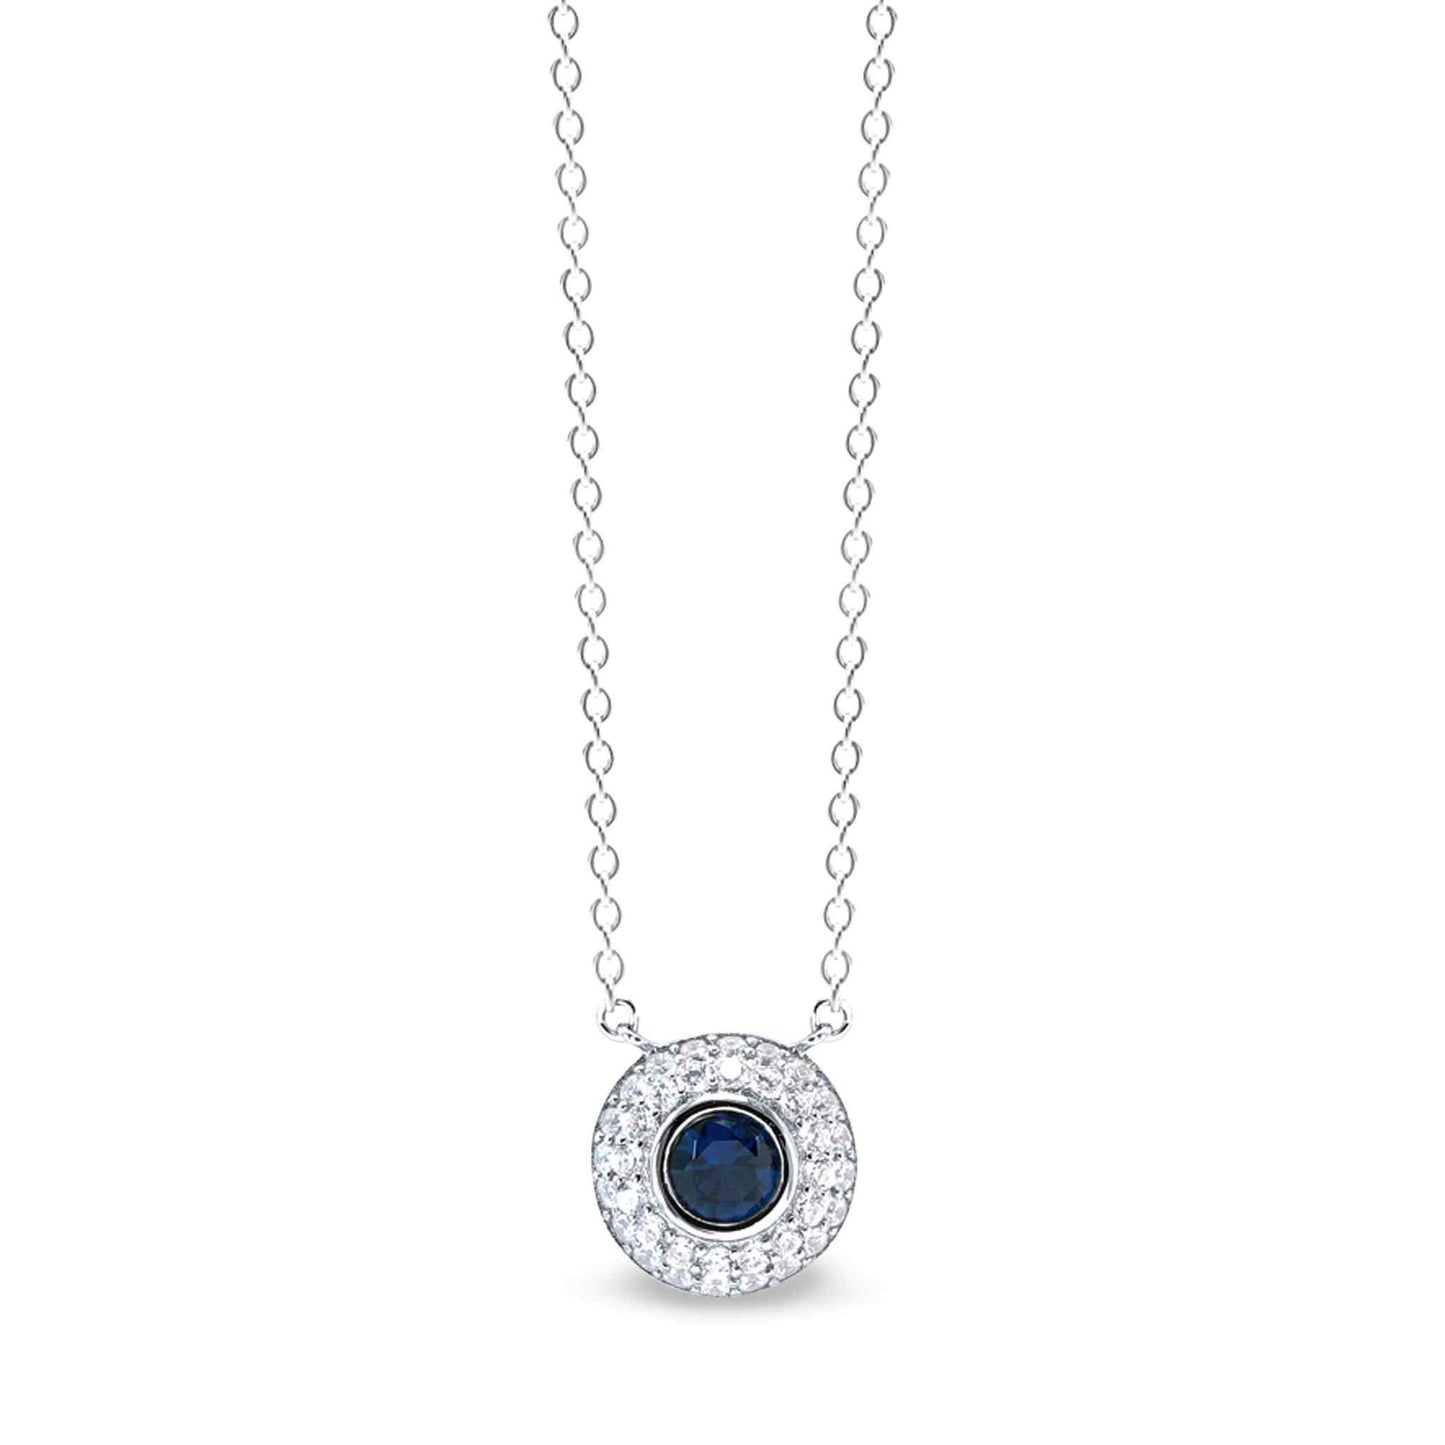 A necklace with synthetic blue sapphire and simulated diamonds displayed on a neutral white background.